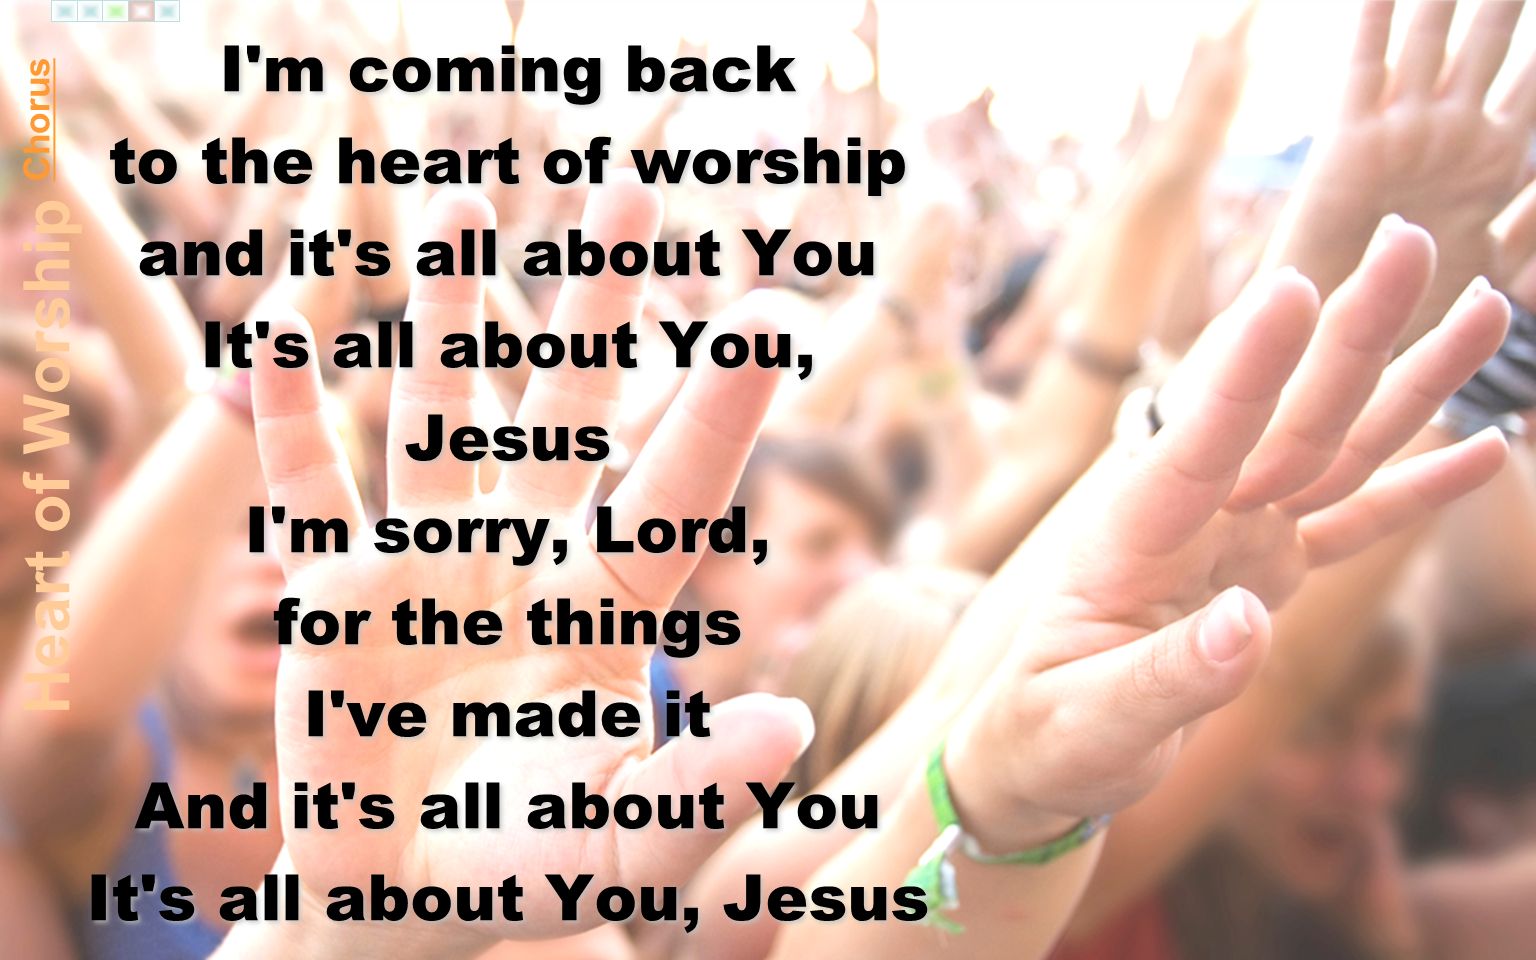 I m coming back to the heart of worship and it s all about You